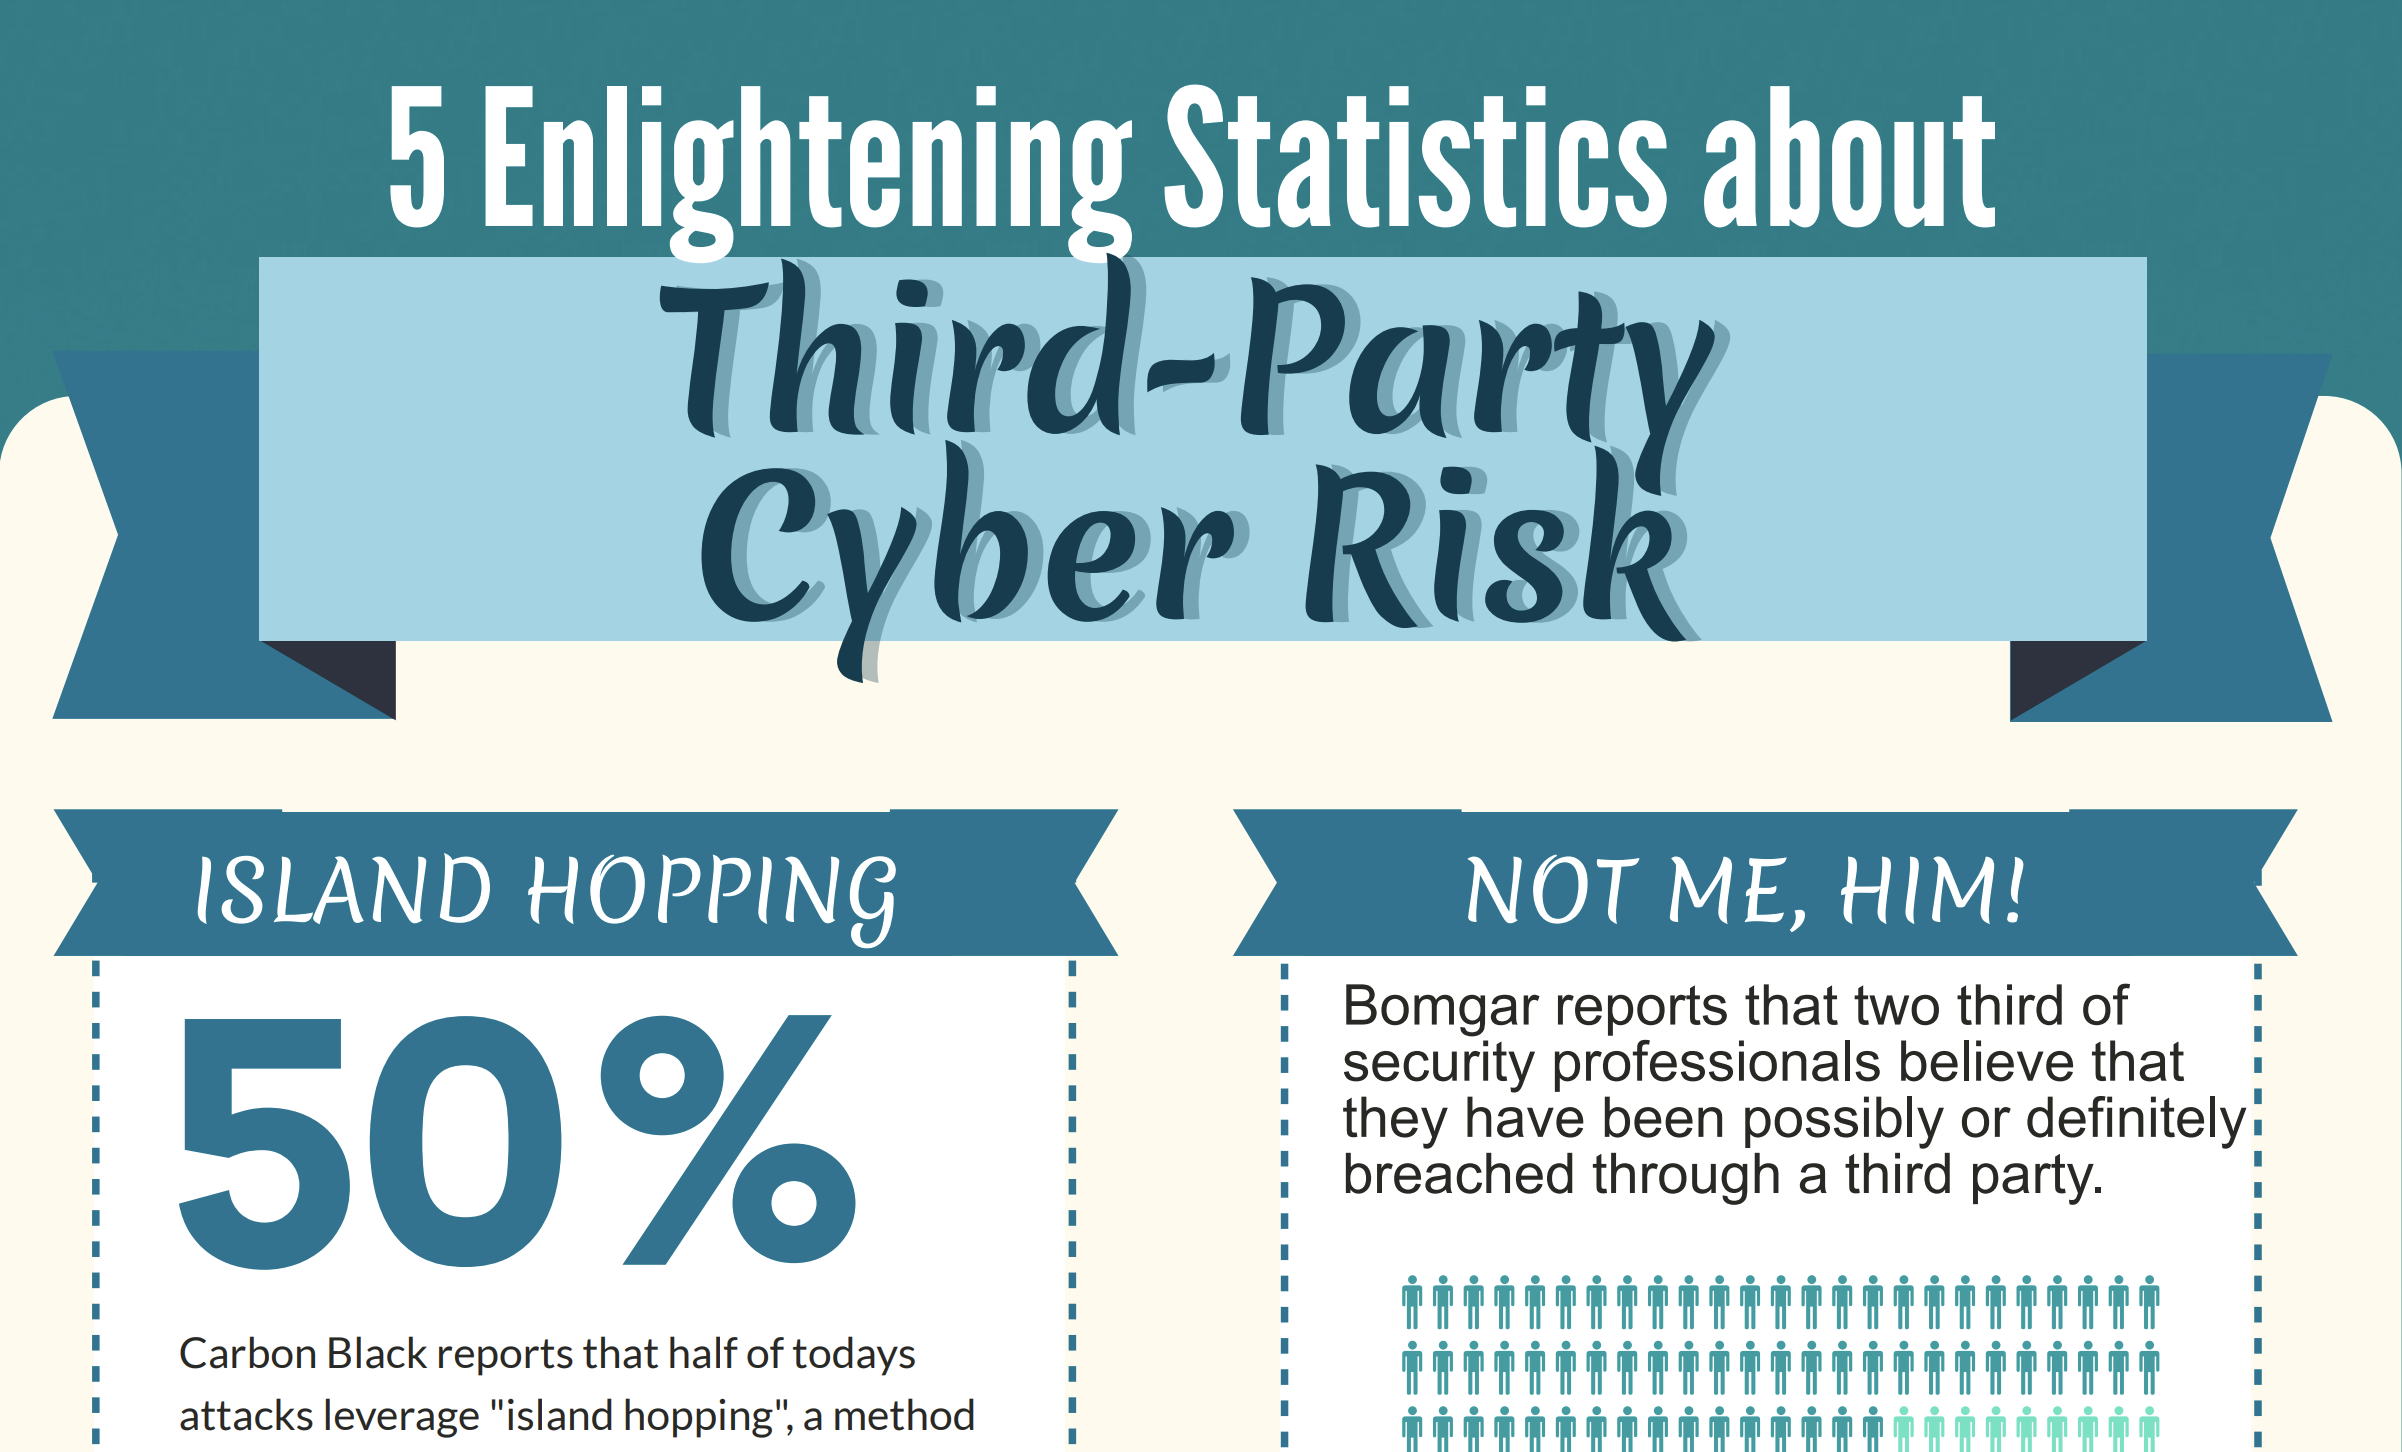 5 Enlightening Statistics About Third-Party Cyber Risk